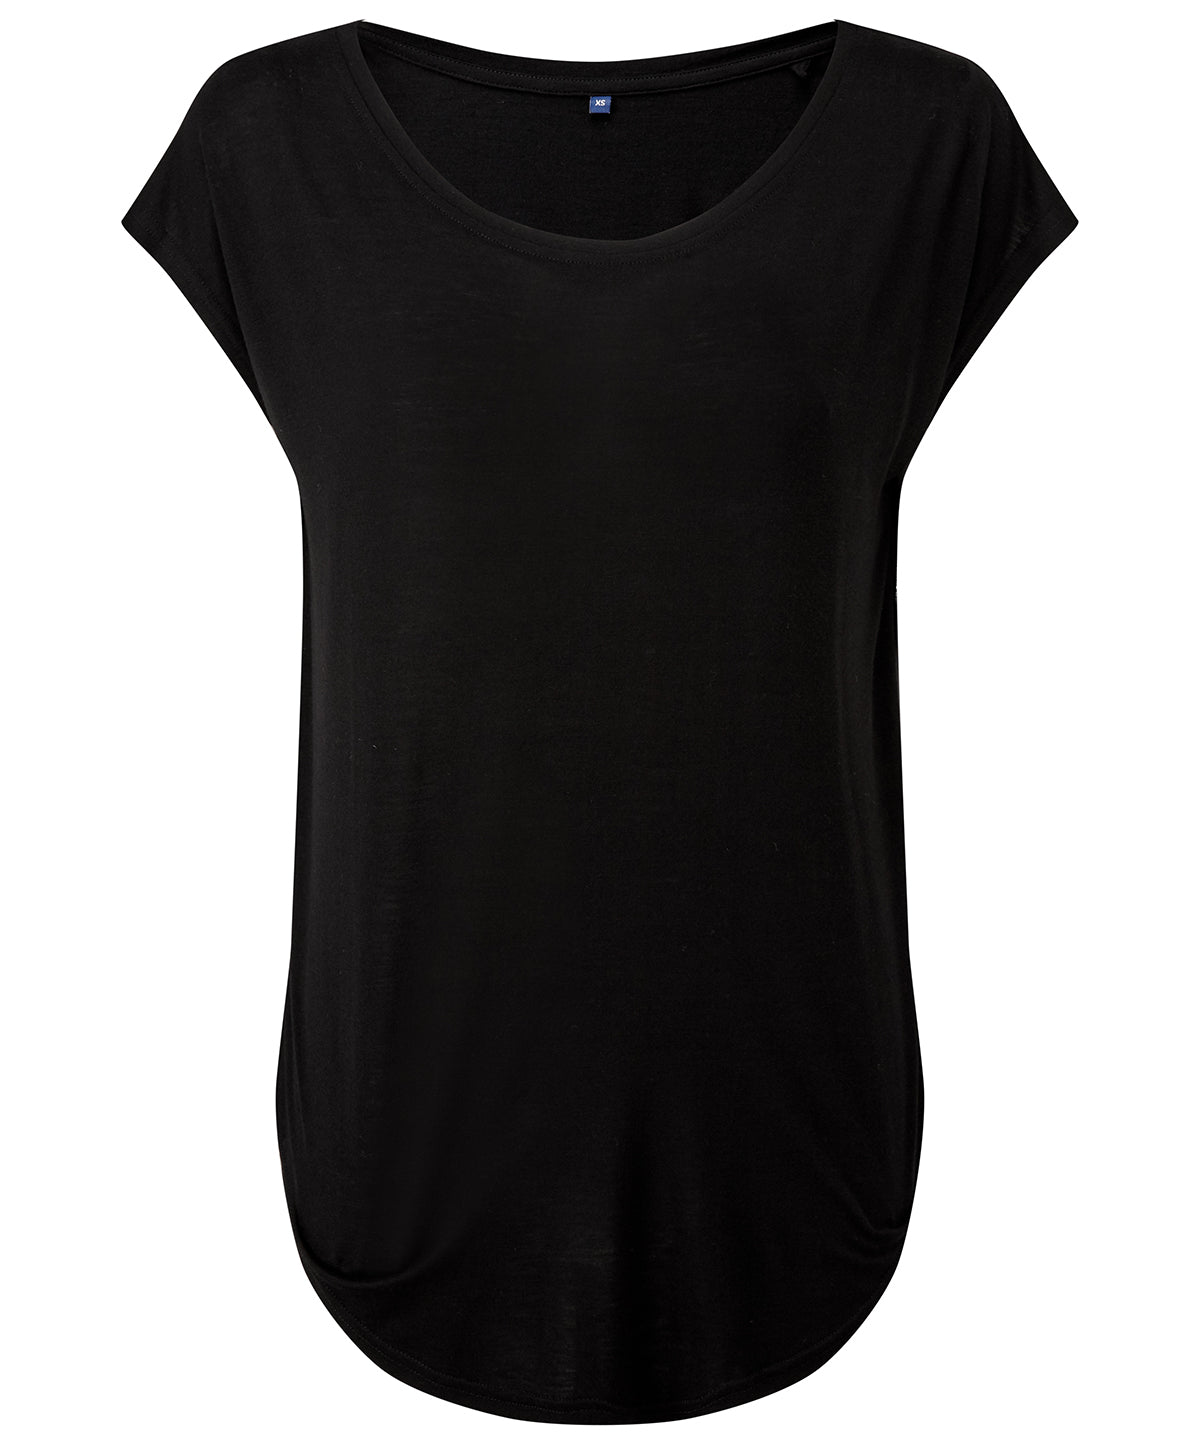 Black - Women's TriDri® yoga cap sleeve top T-Shirts TriDri® Activewear & Performance, Exclusives, On-Trend Activewear, Padded Perfection, Plus Sizes, Rebrandable, Sports & Leisure, T-Shirts & Vests Schoolwear Centres